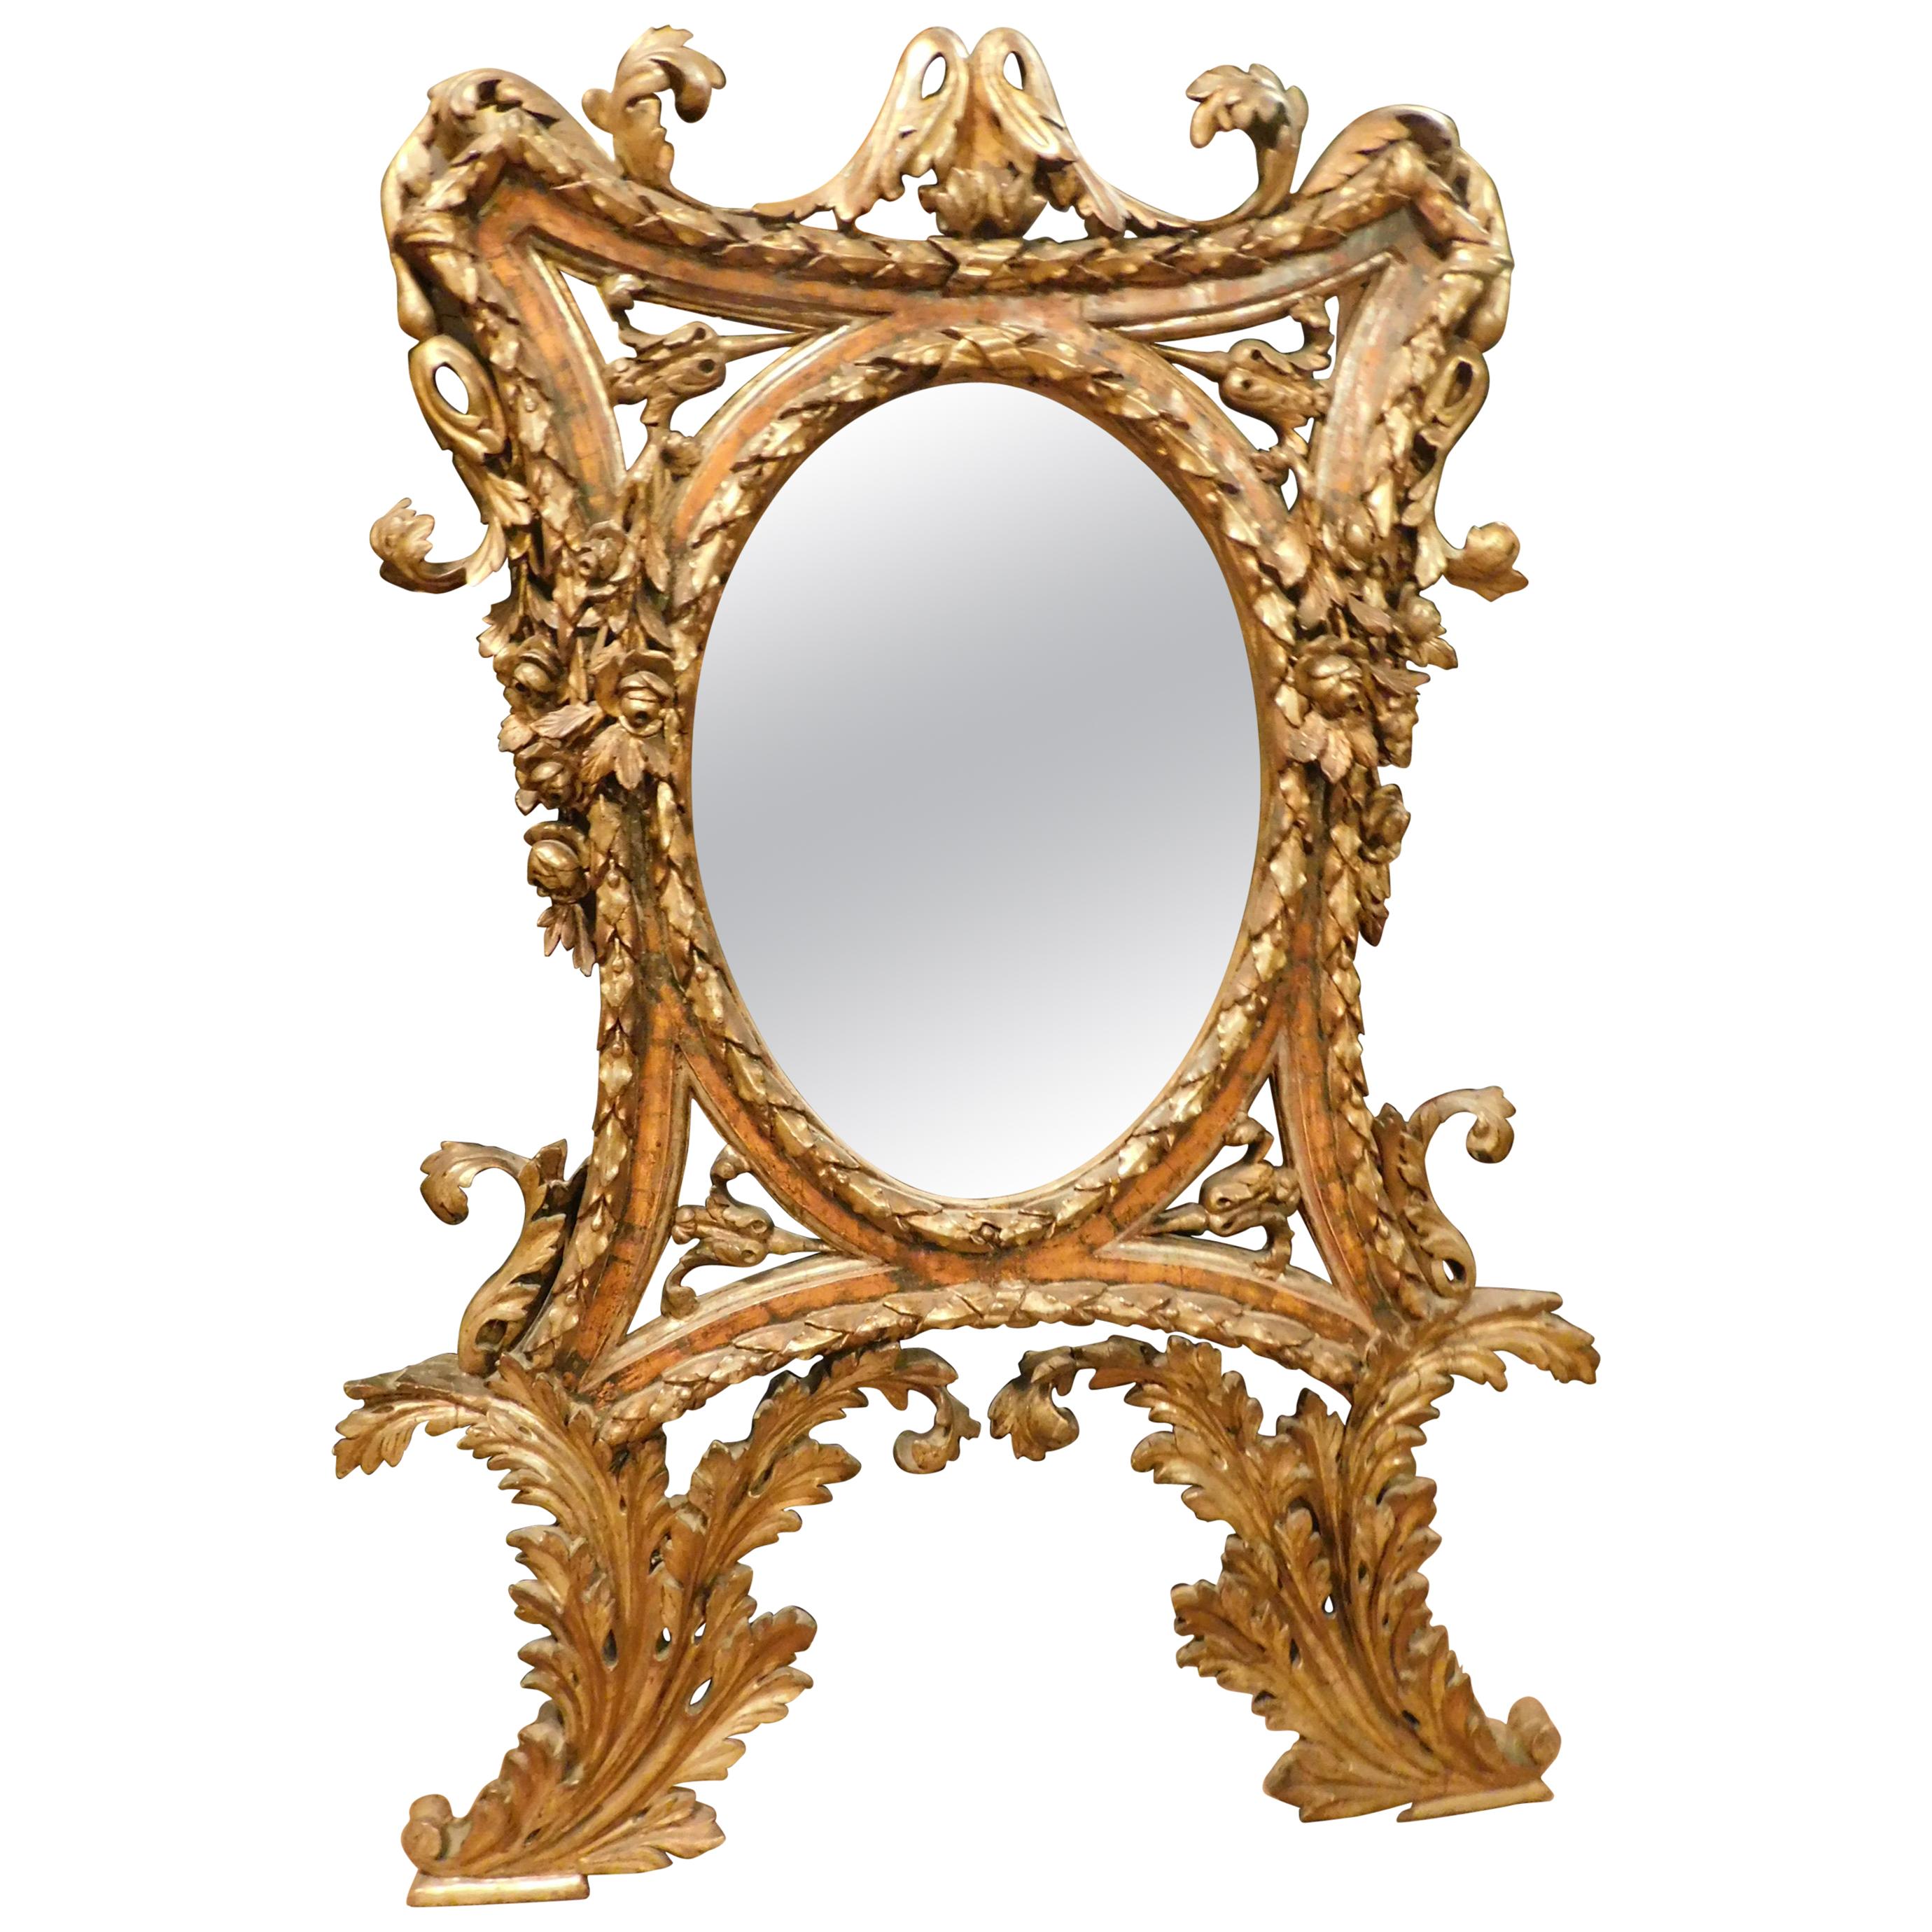 Antique Rich Golden Mirror with Leaves, 18th Century Italy